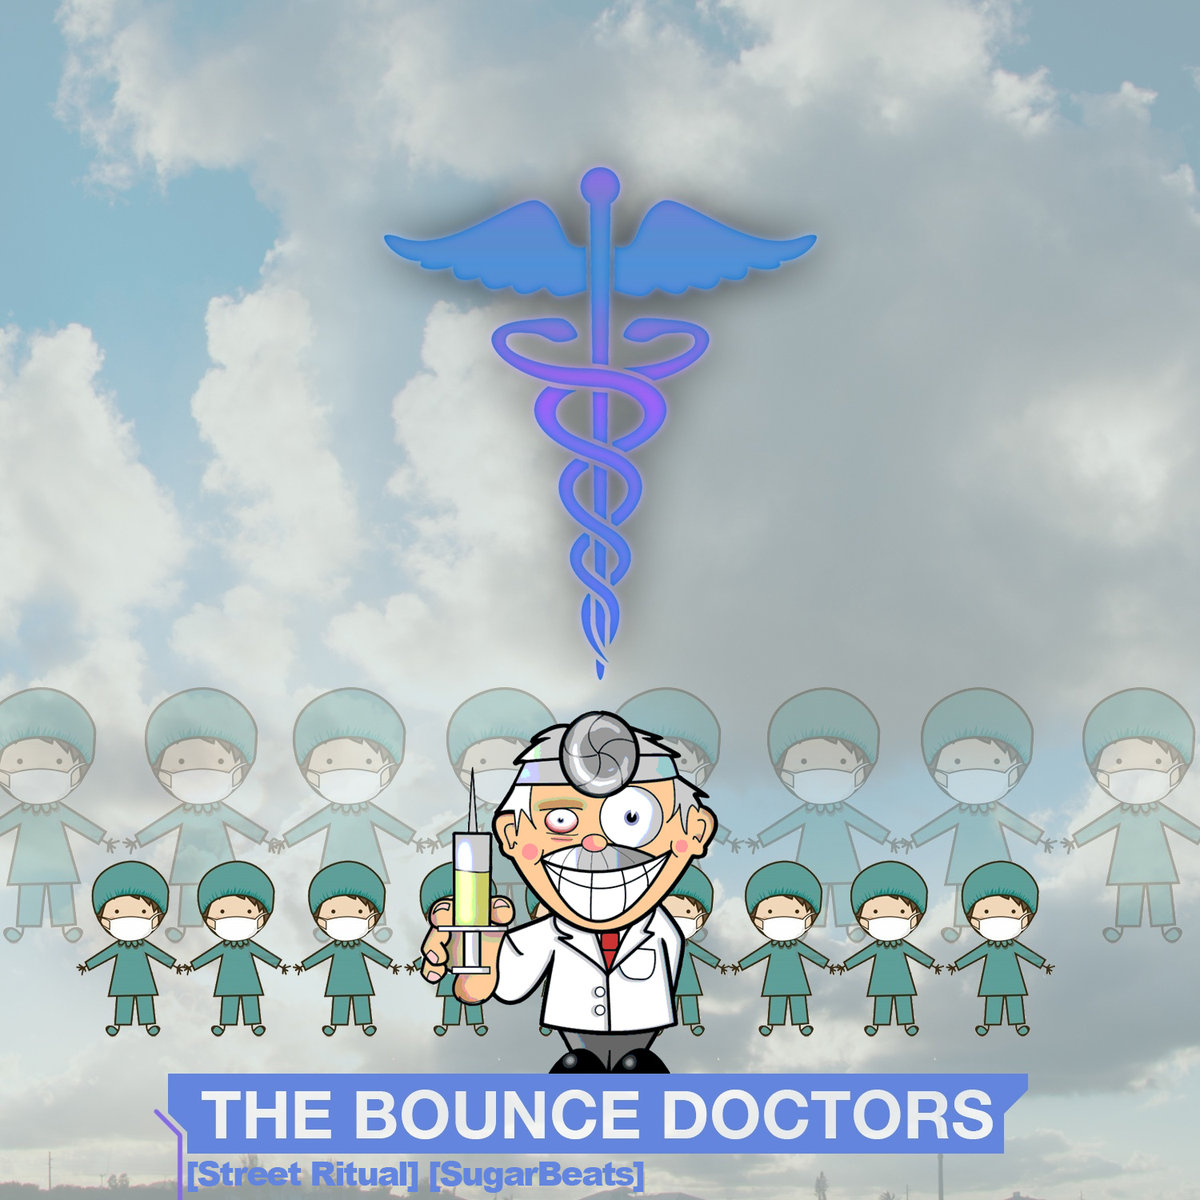 Divinity & Squama - Swampladon @ 'The Bounce Doctors' album (bass, chillstep)